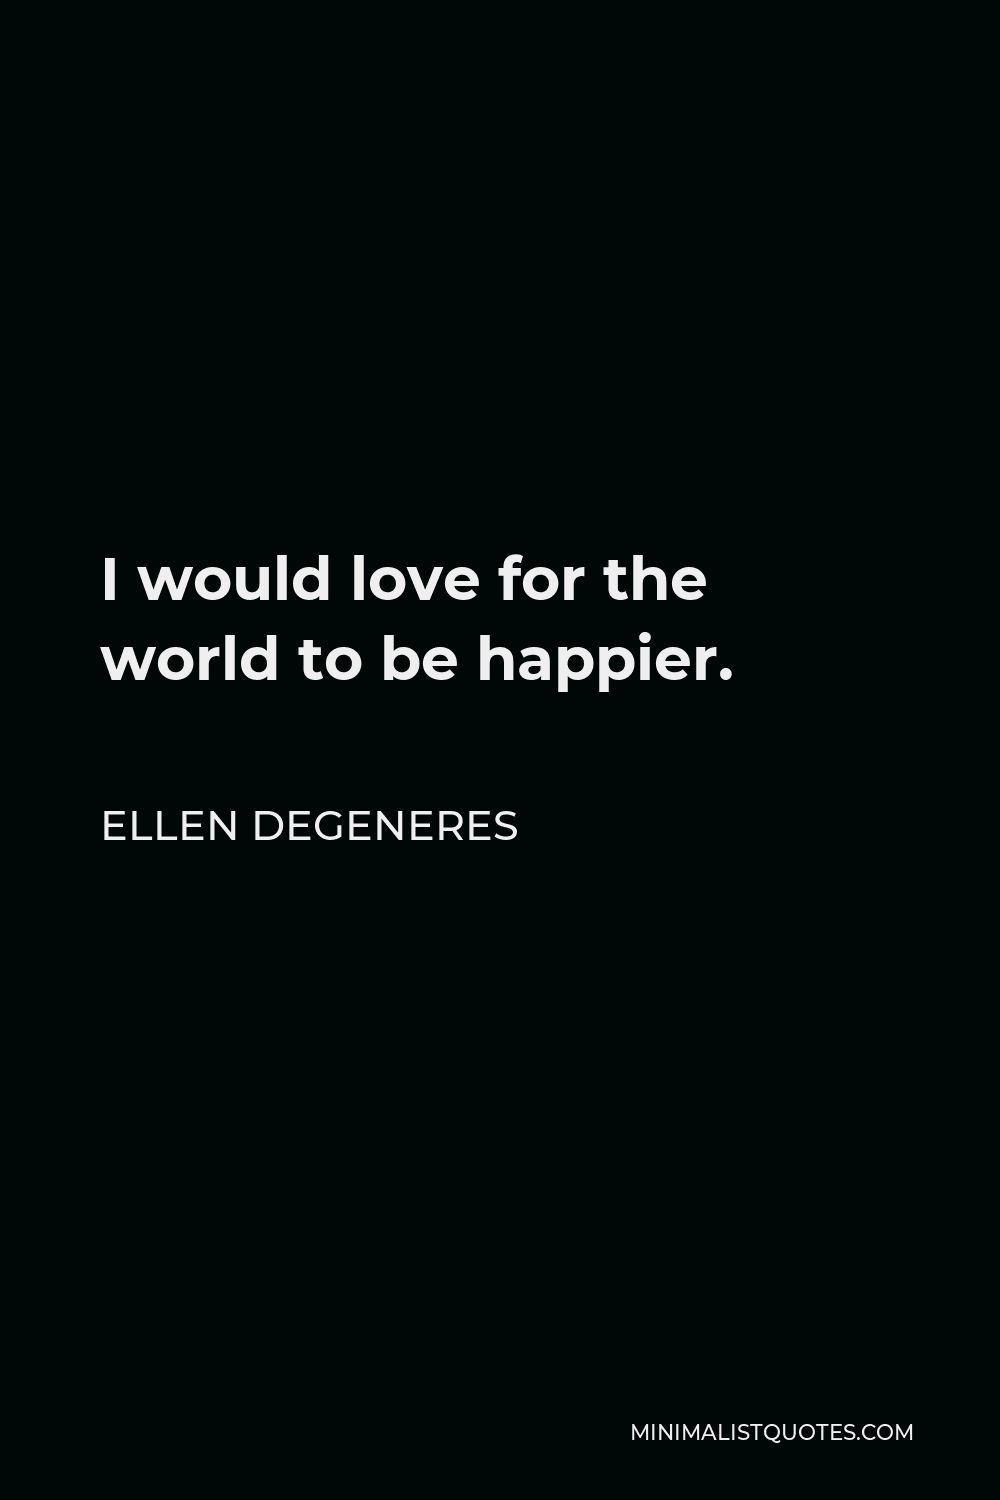 Ellen DeGeneres Quote - I would love for the world to be happier.